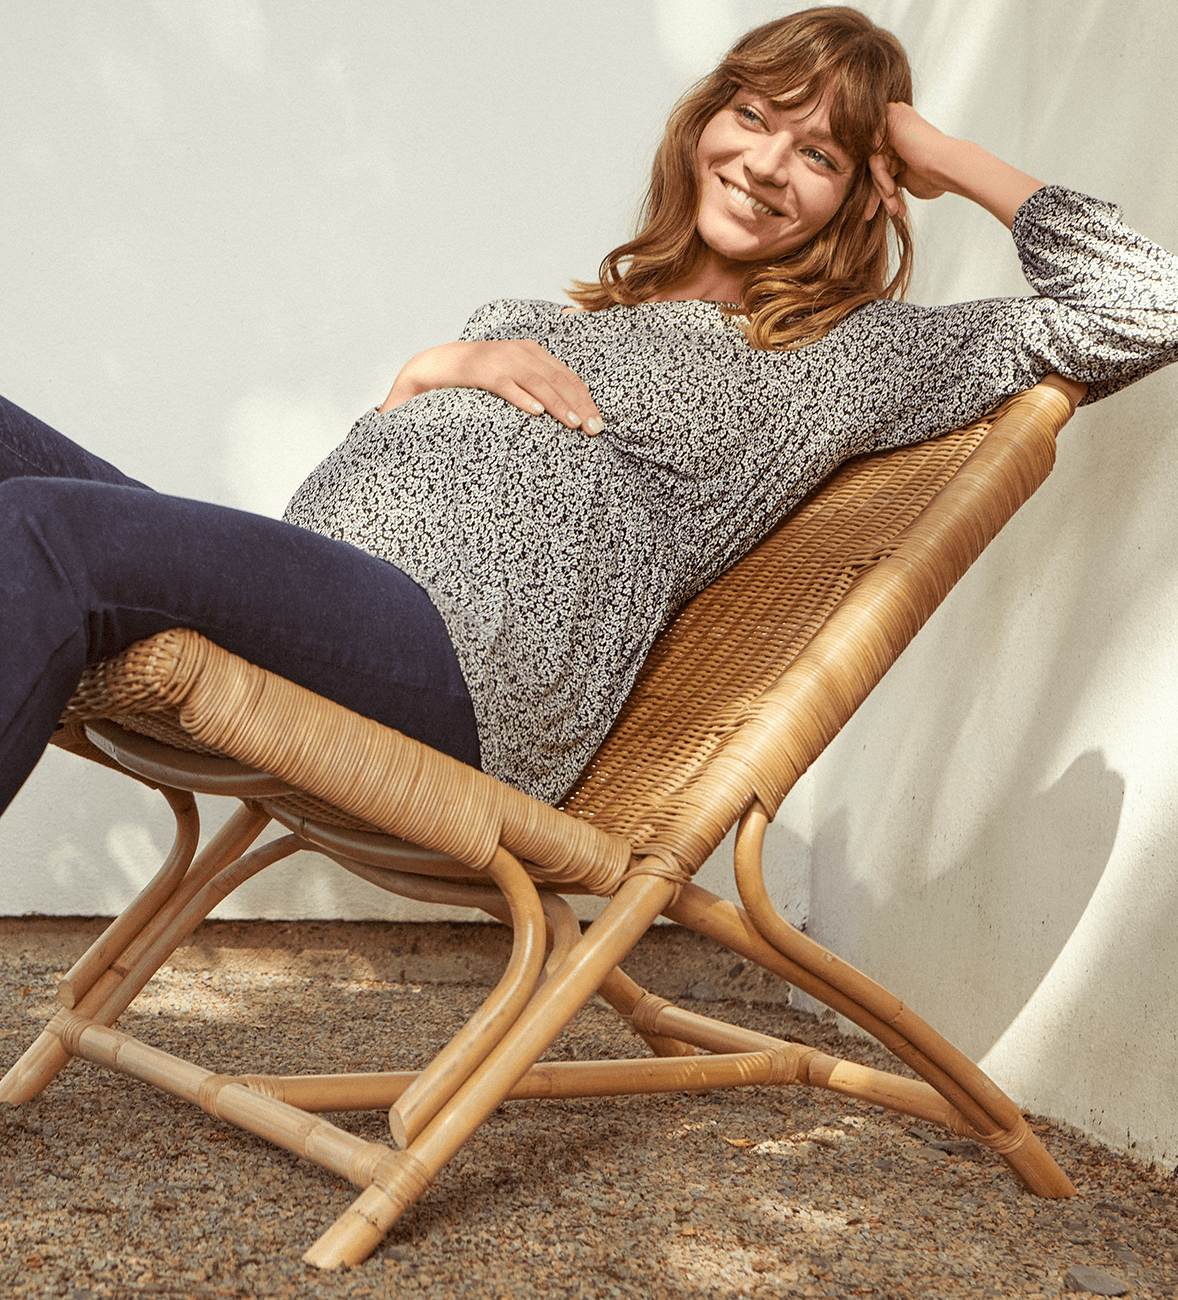 A pregnant woman relaxes on a sun lounger in a comfortable maternity shirt.